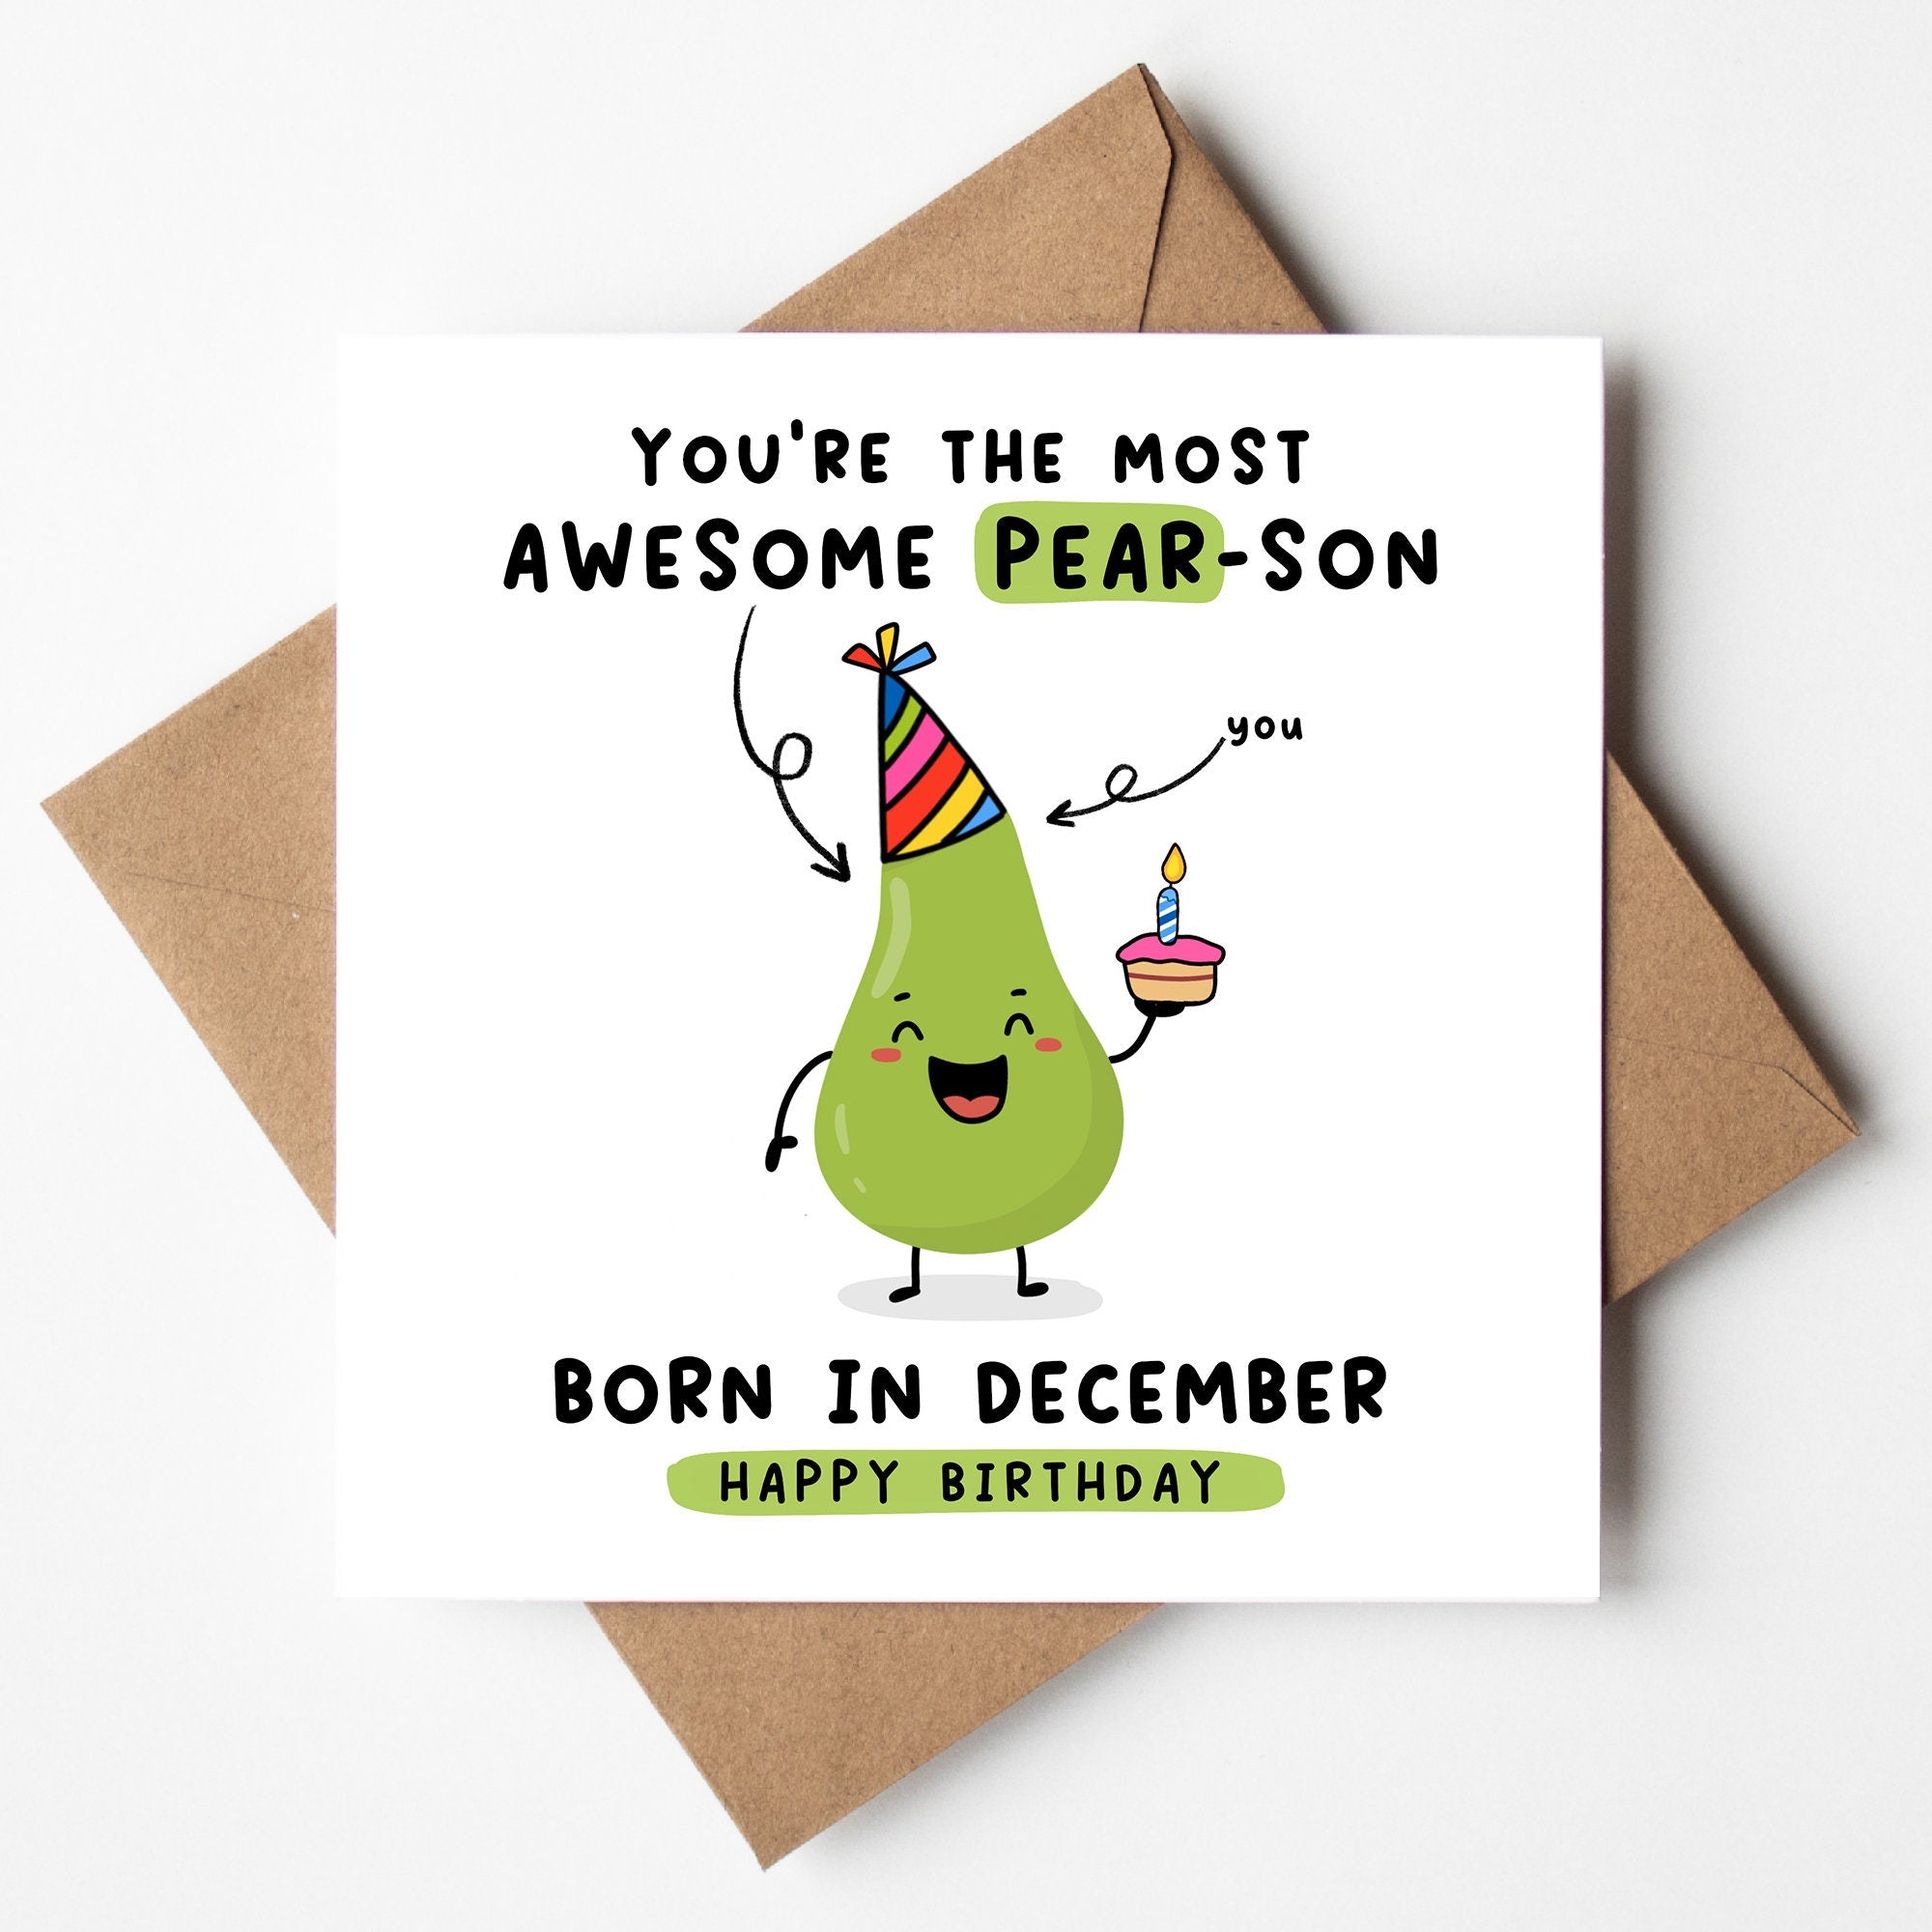 You're The Most Awesome Pear-son born in December, Funny Pun Card, Pear Pun Card, Born In December, Birth Month Card December